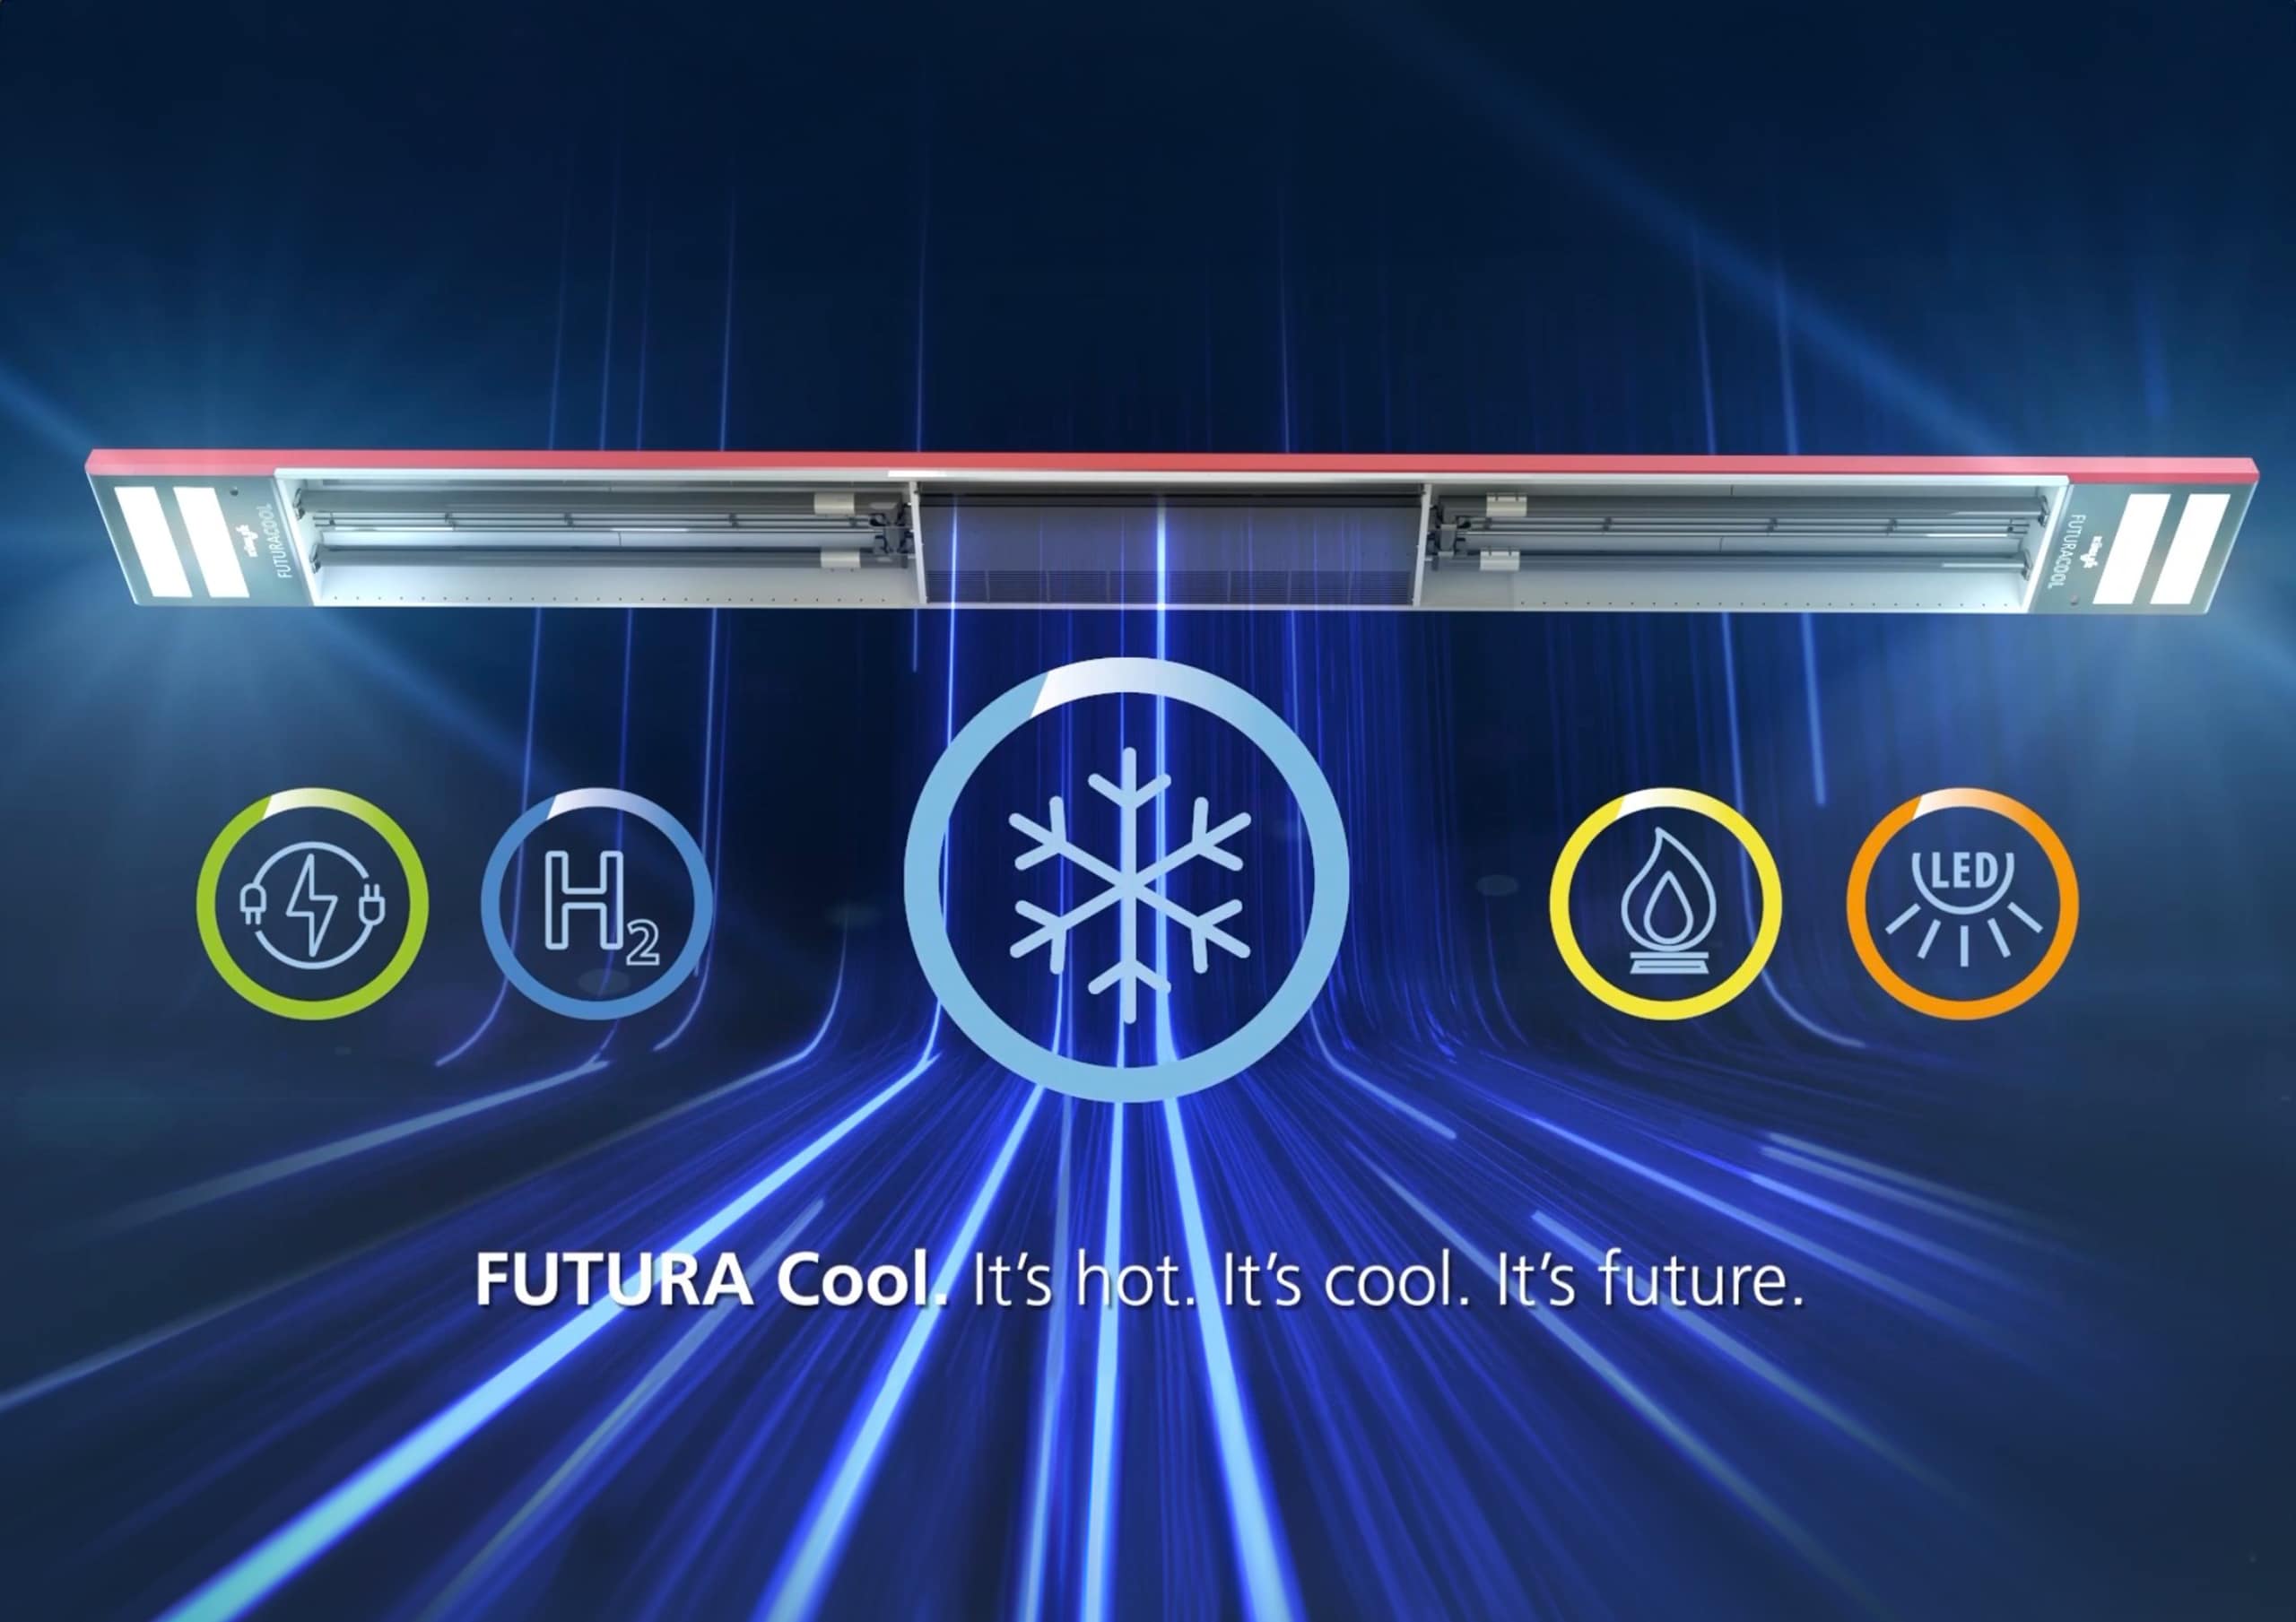 FUTURA air conditioning system with energy efficiency symbols.